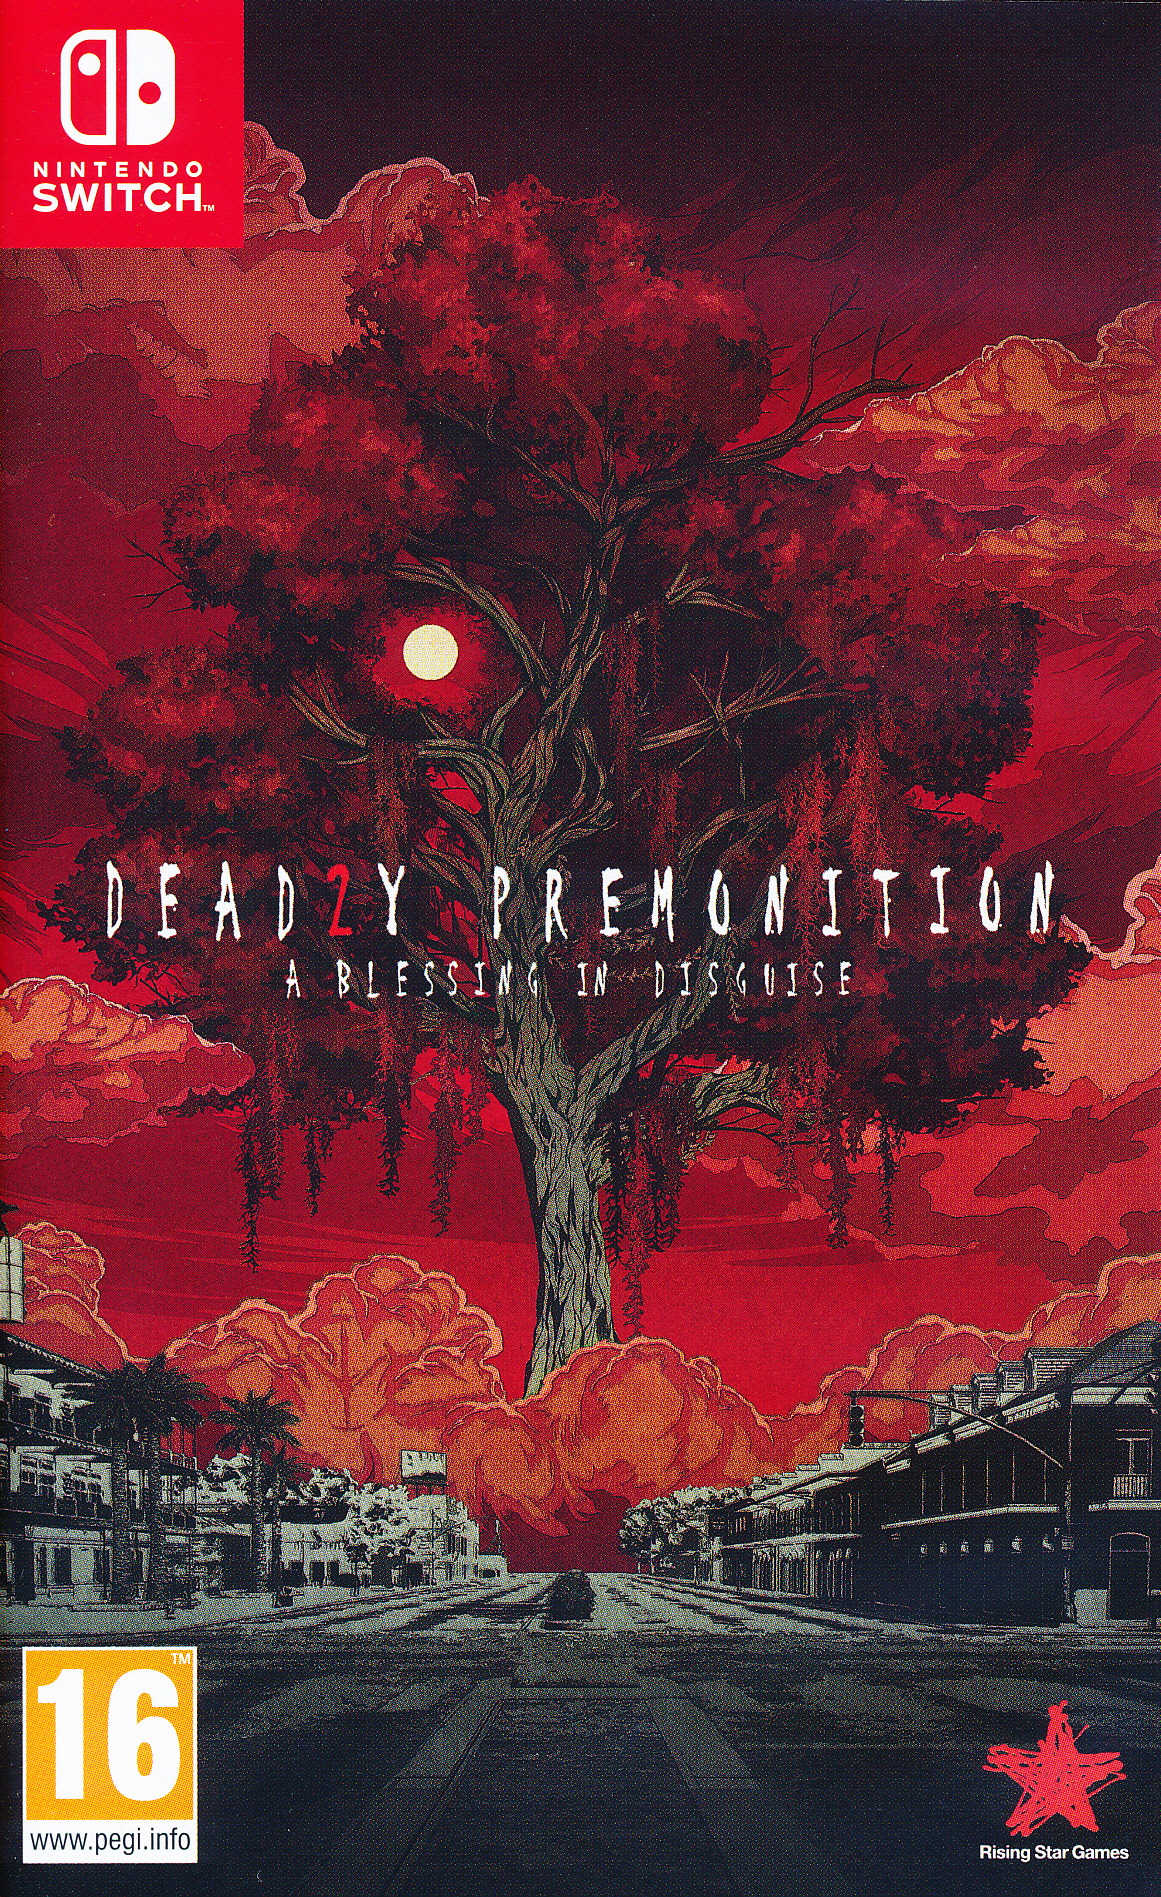 Deadly Premonition 2 NS